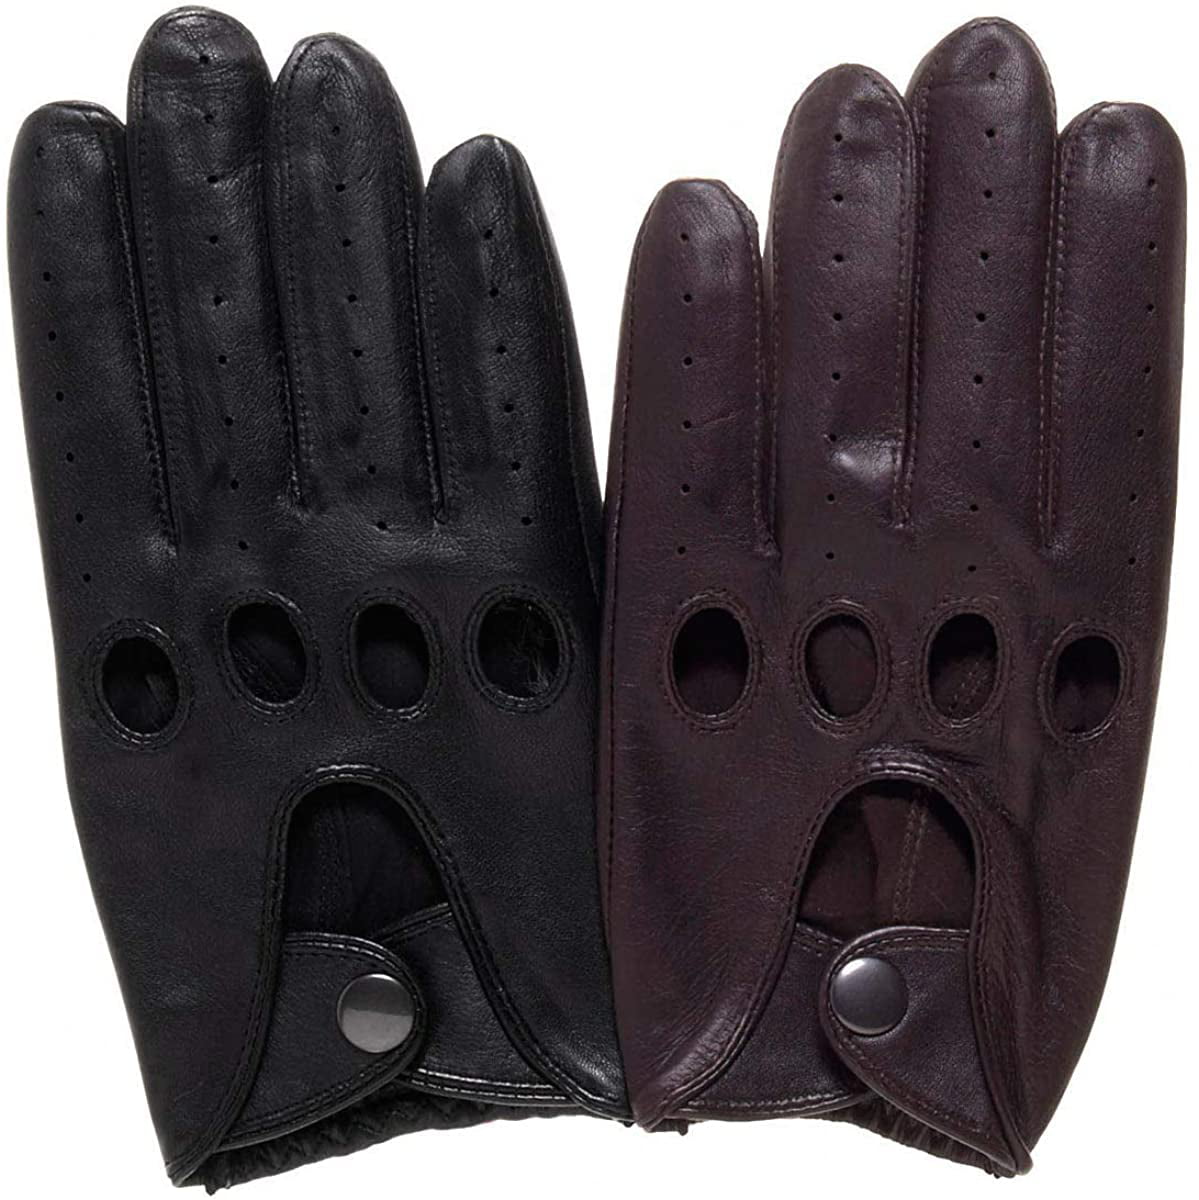 Silverstone Our Bestselling Men's Leather Driving Gloves by Pratt and Hart RS6738 